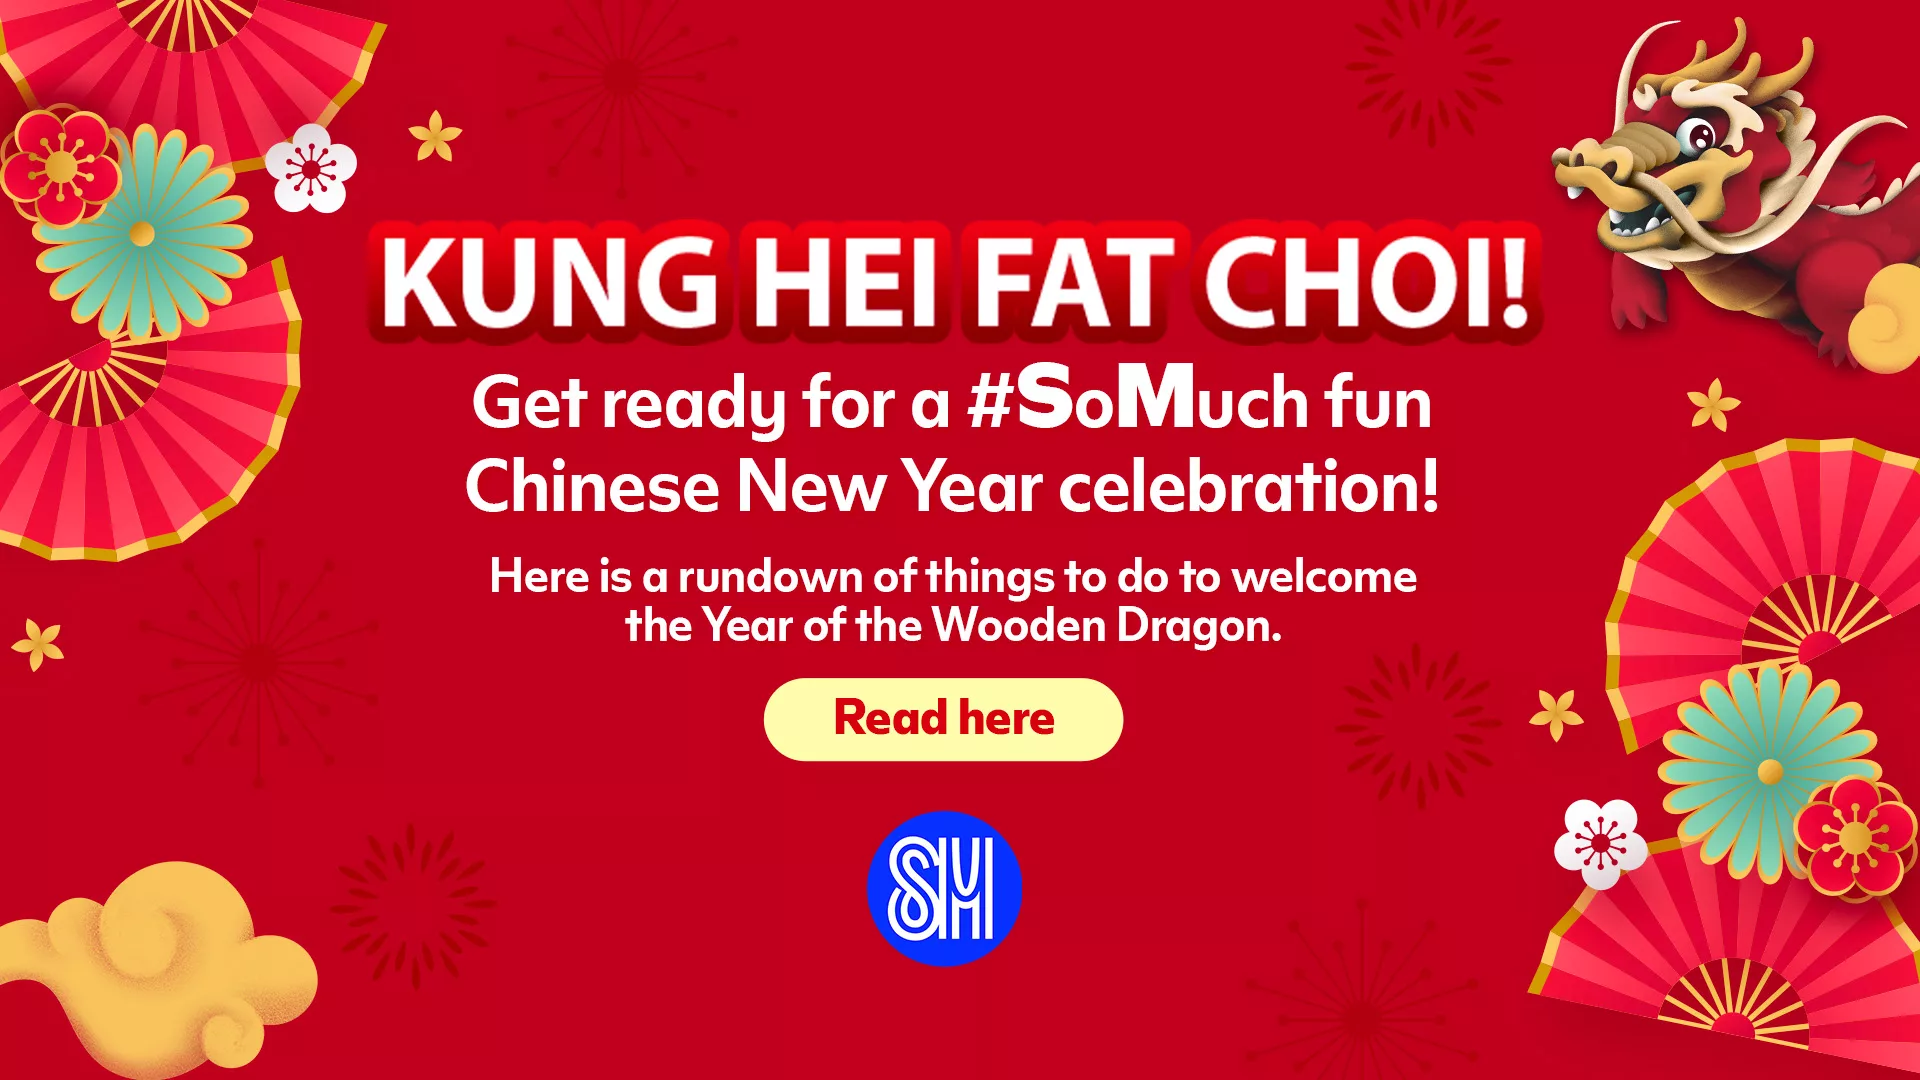 Kung Hei Fat Choi! Get ready for a #SoMuch fun Chinese New Year celebration!